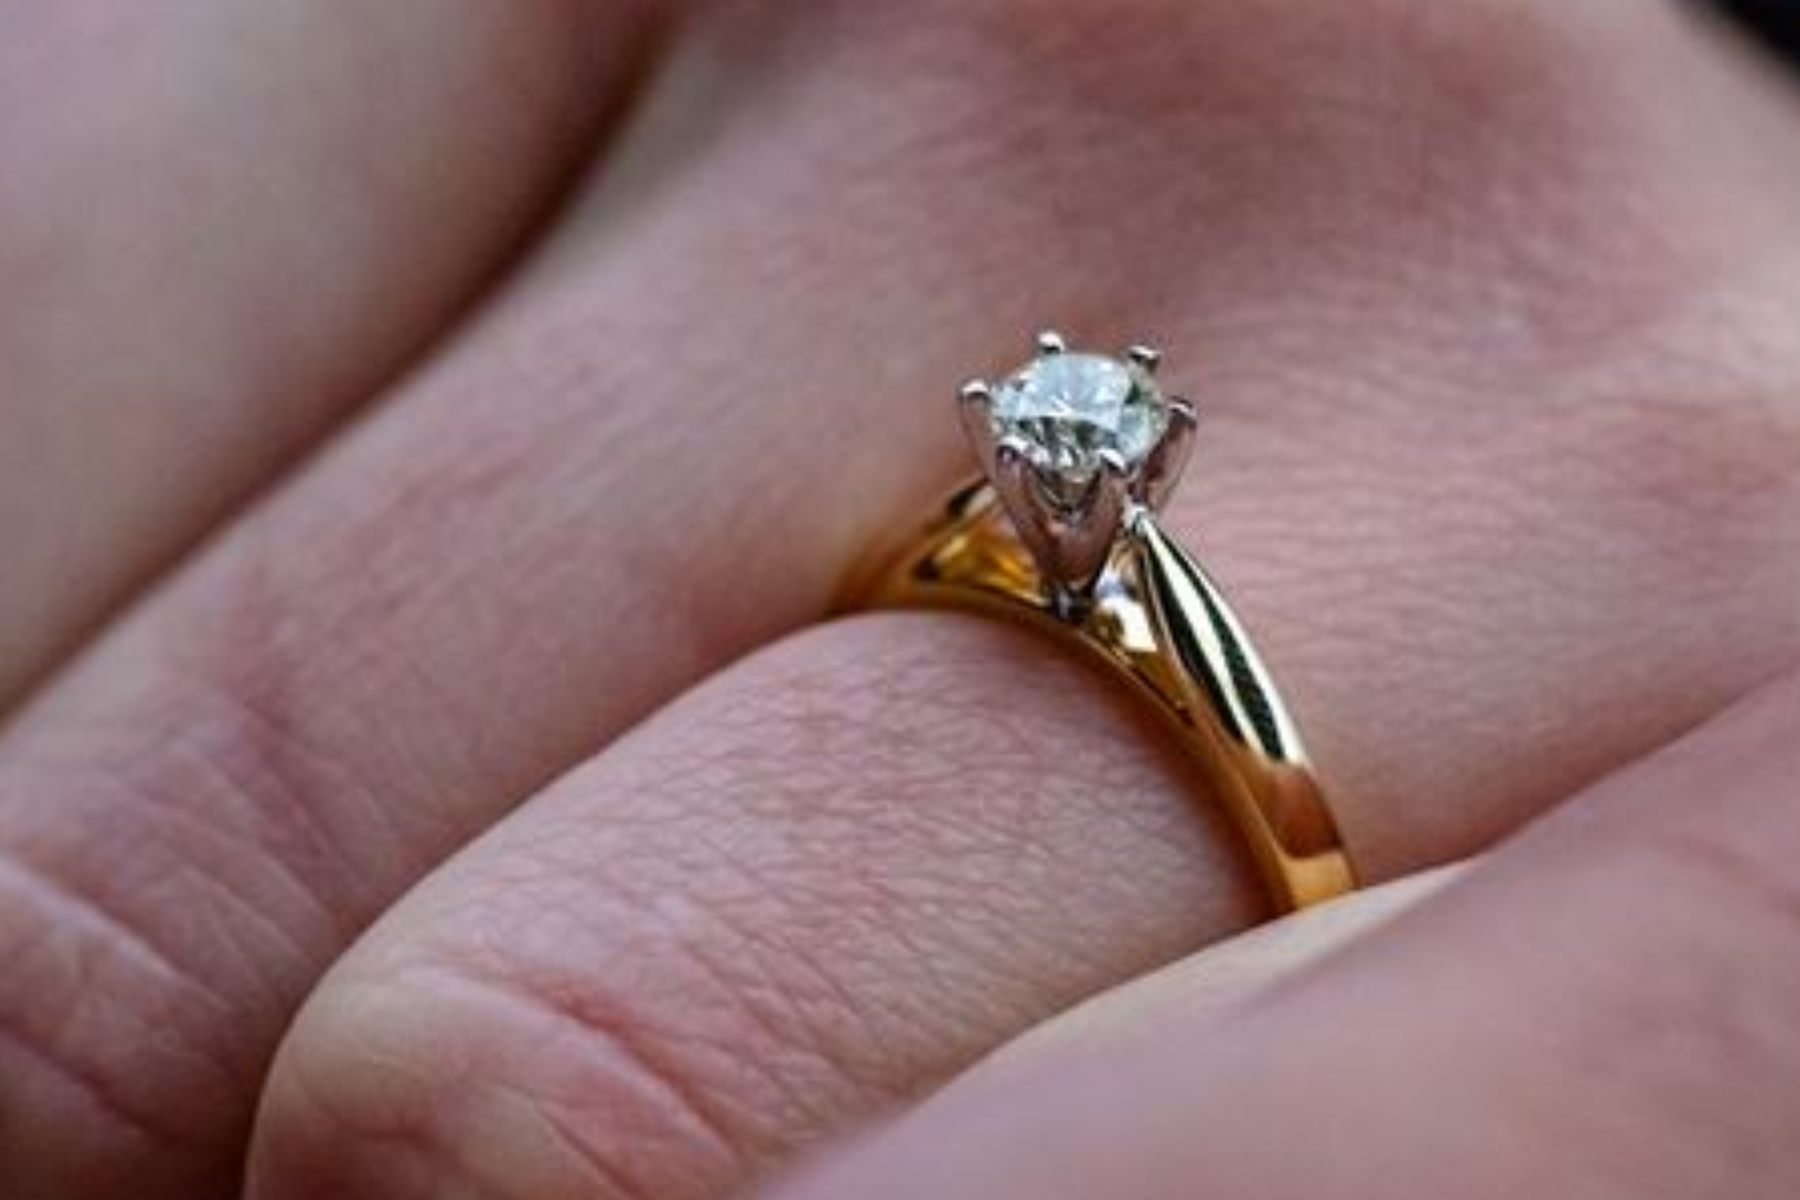 A gold band engagement ring with a diamond stone on a finger